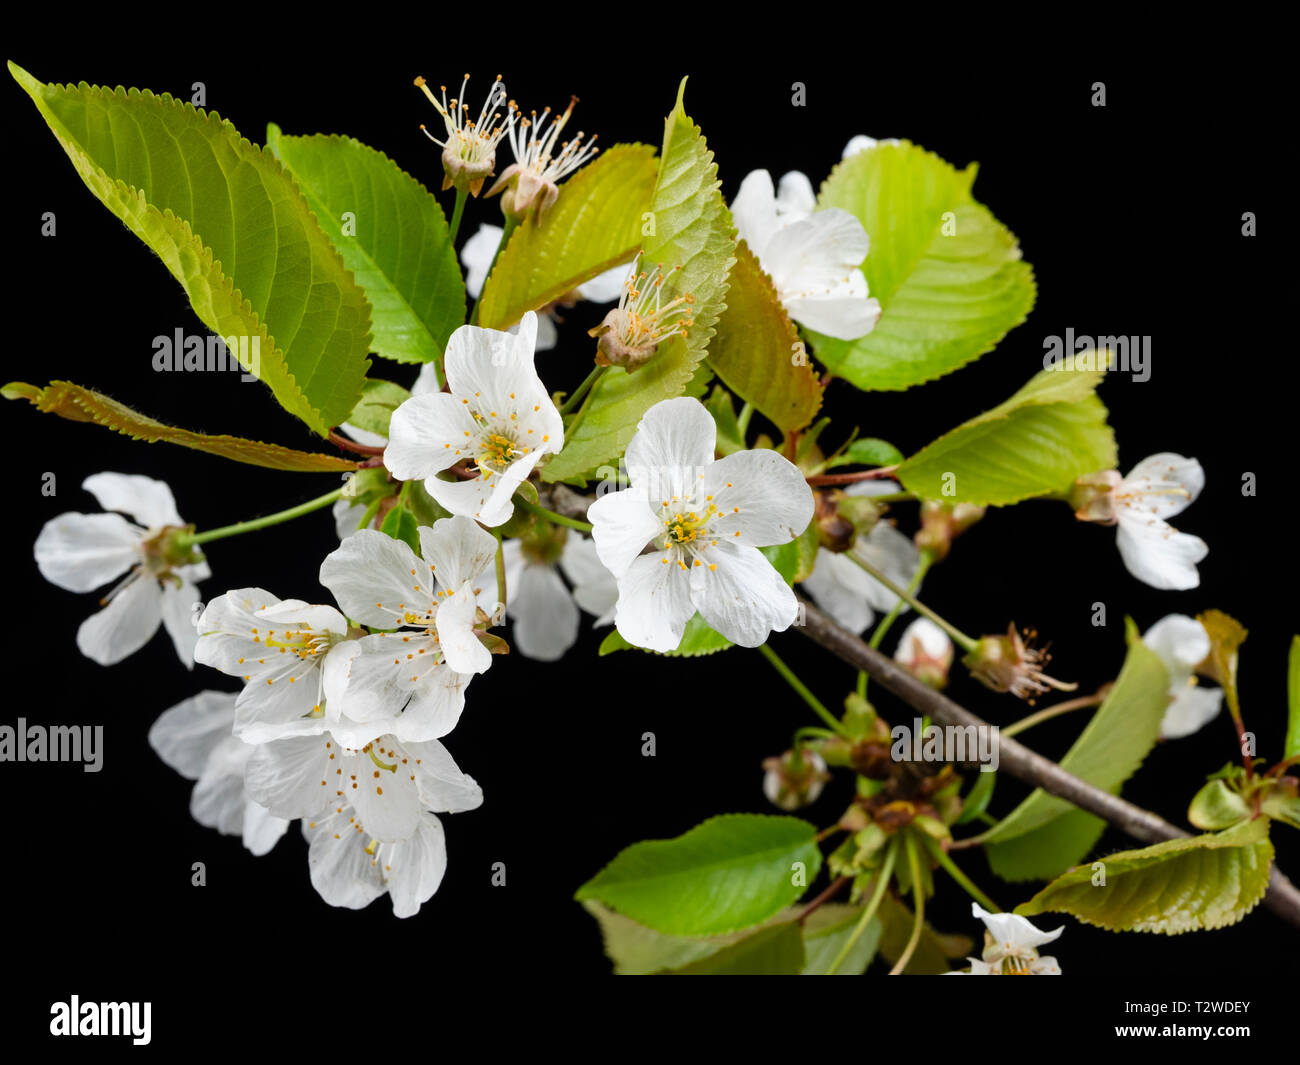 White single flowers of the wild cherry tree, Prunus avium, in early spring bloom against a black background Stock Photo